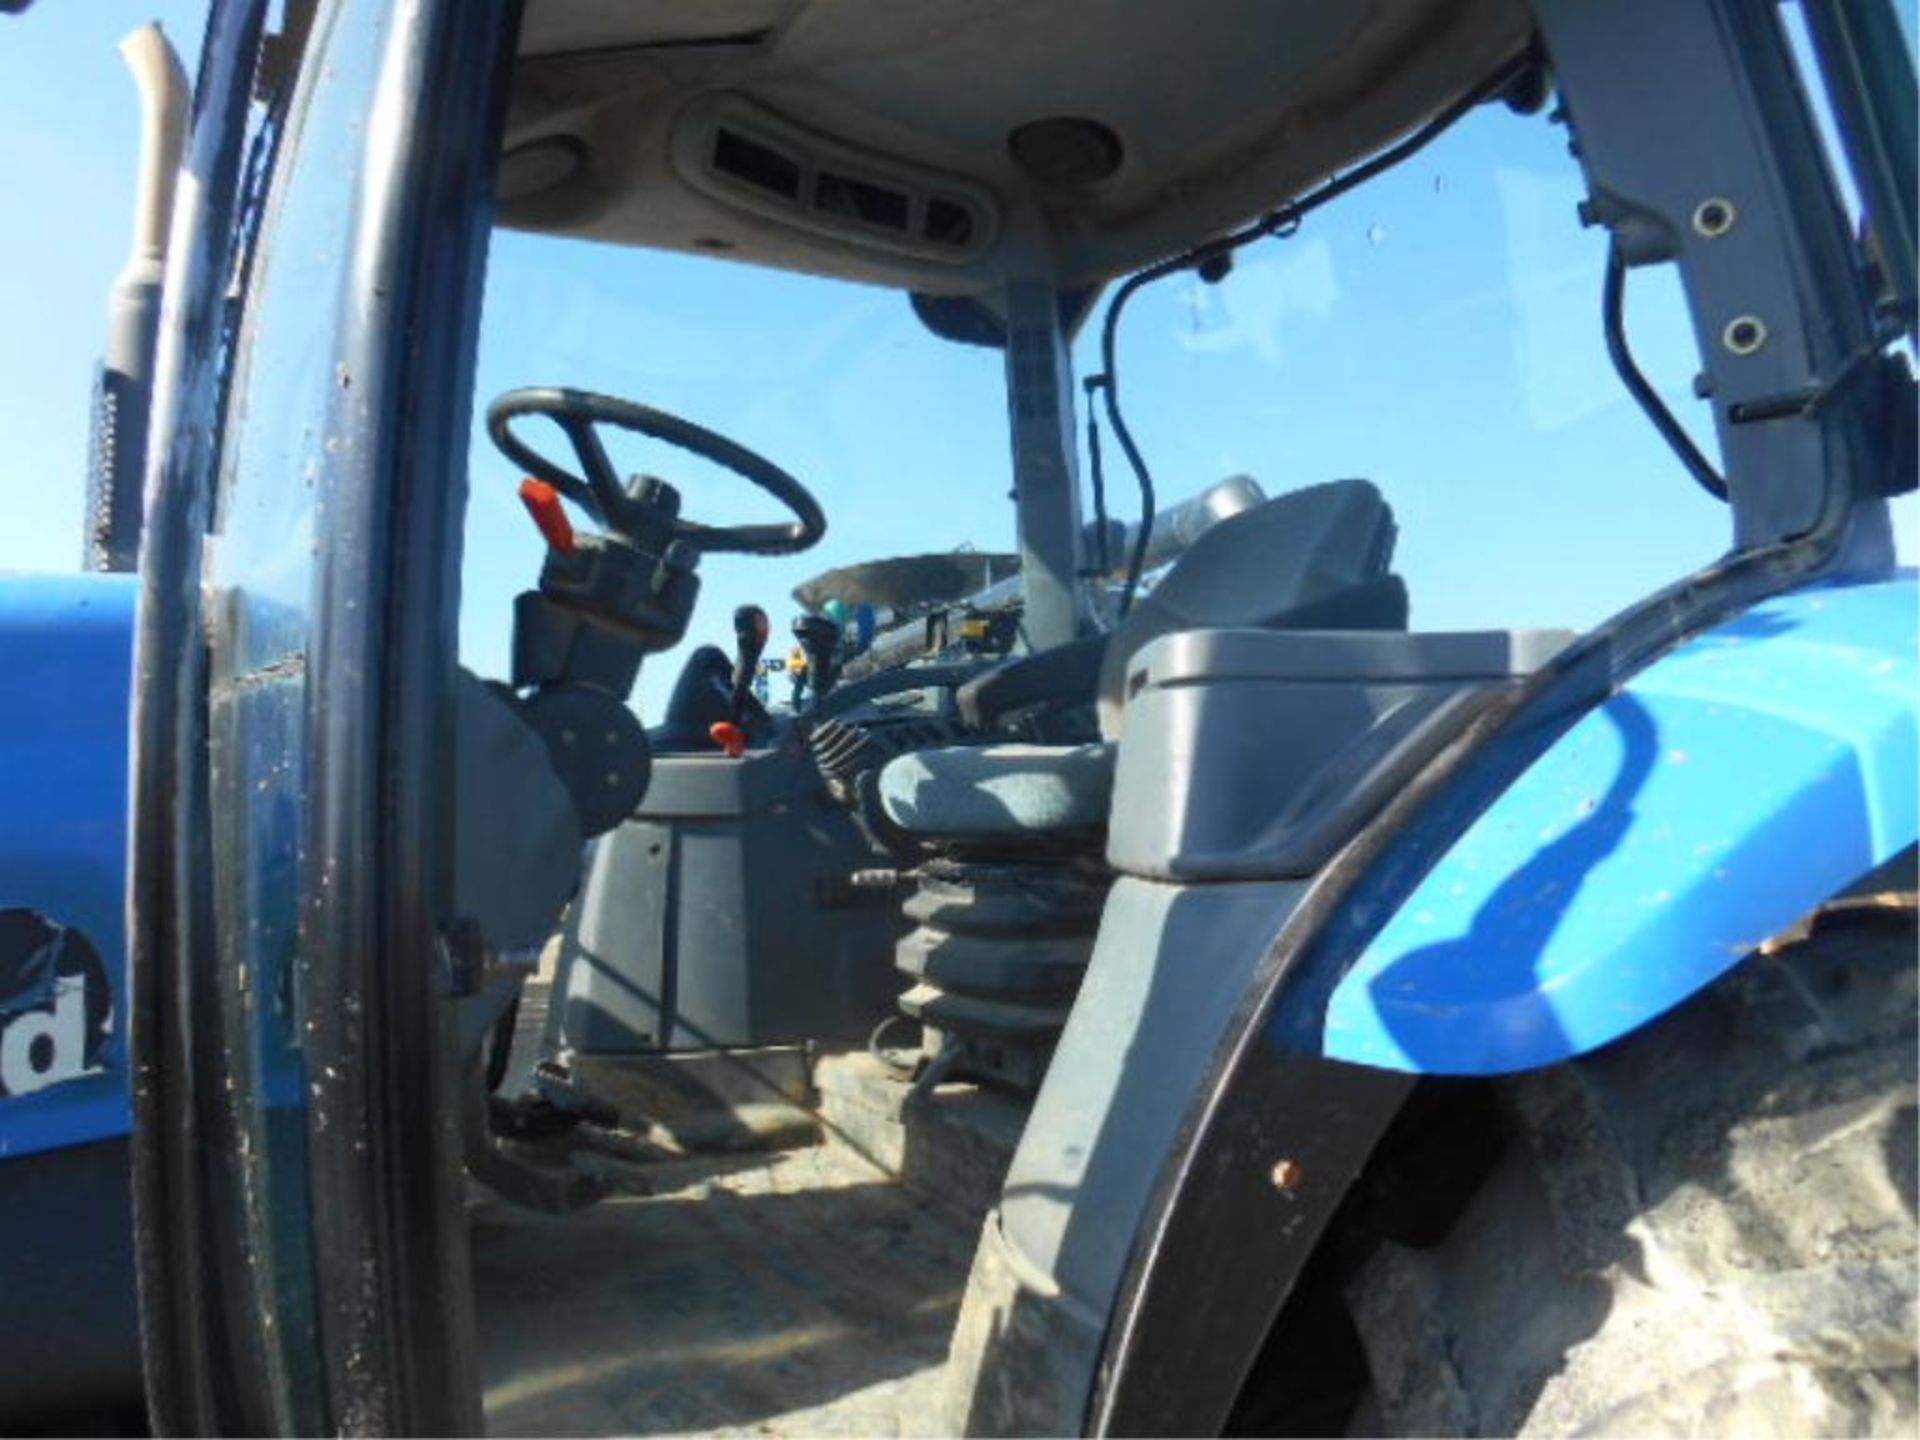 New Holland TS115 Tractor. '06, sn#ACP258890 9523 Hrs, MFWD, Cab, 115 HP, 12/2, 3 Pt, 2 Hyd. - Image 13 of 20